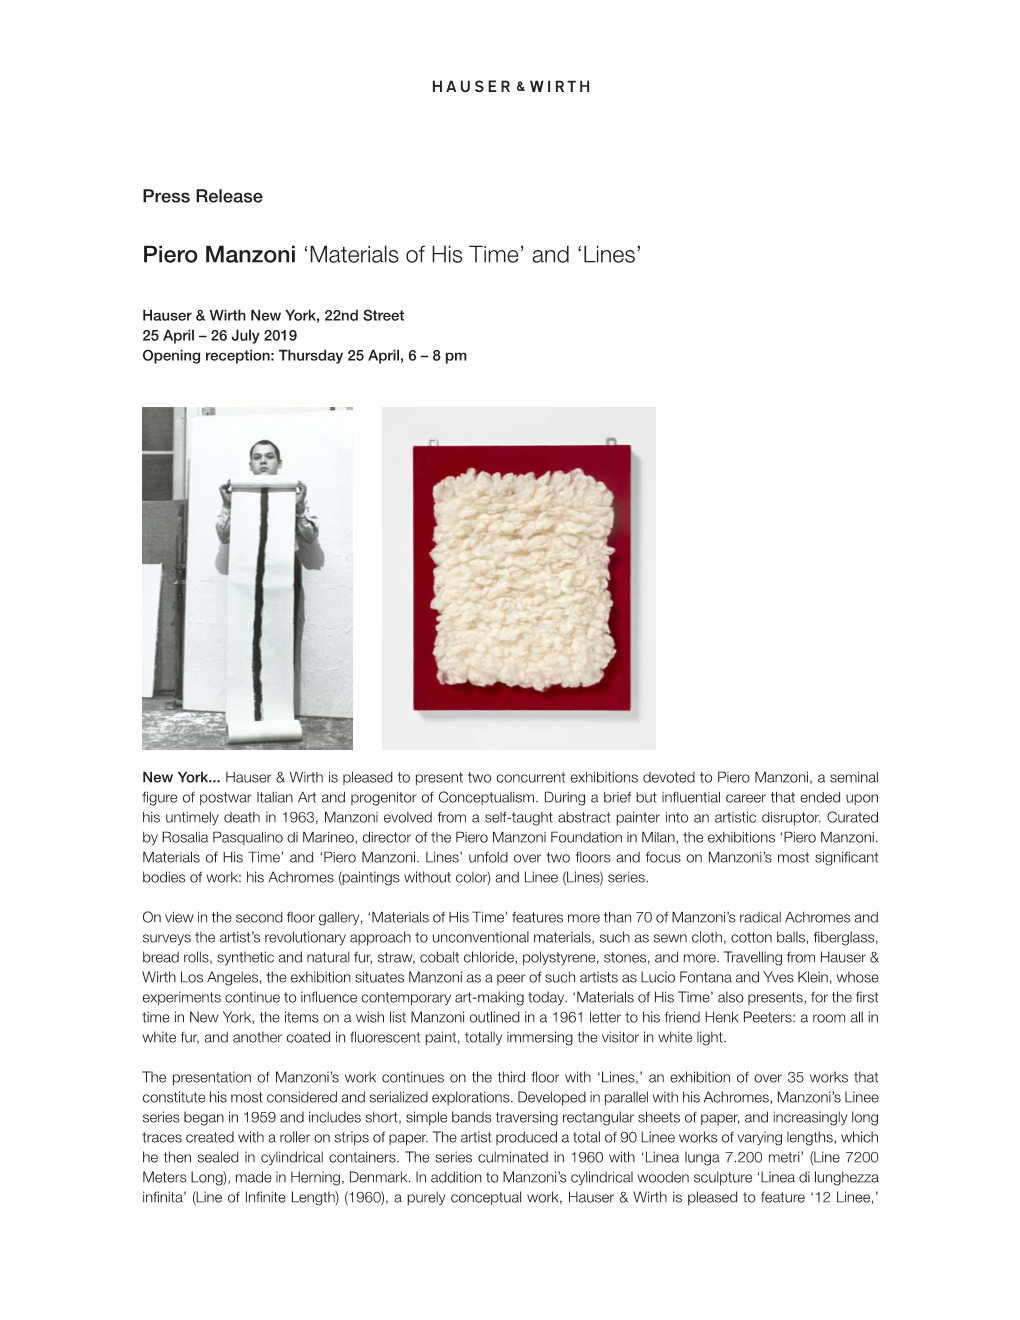 Piero Manzoni ‘Materials of His Time’ and ‘Lines’